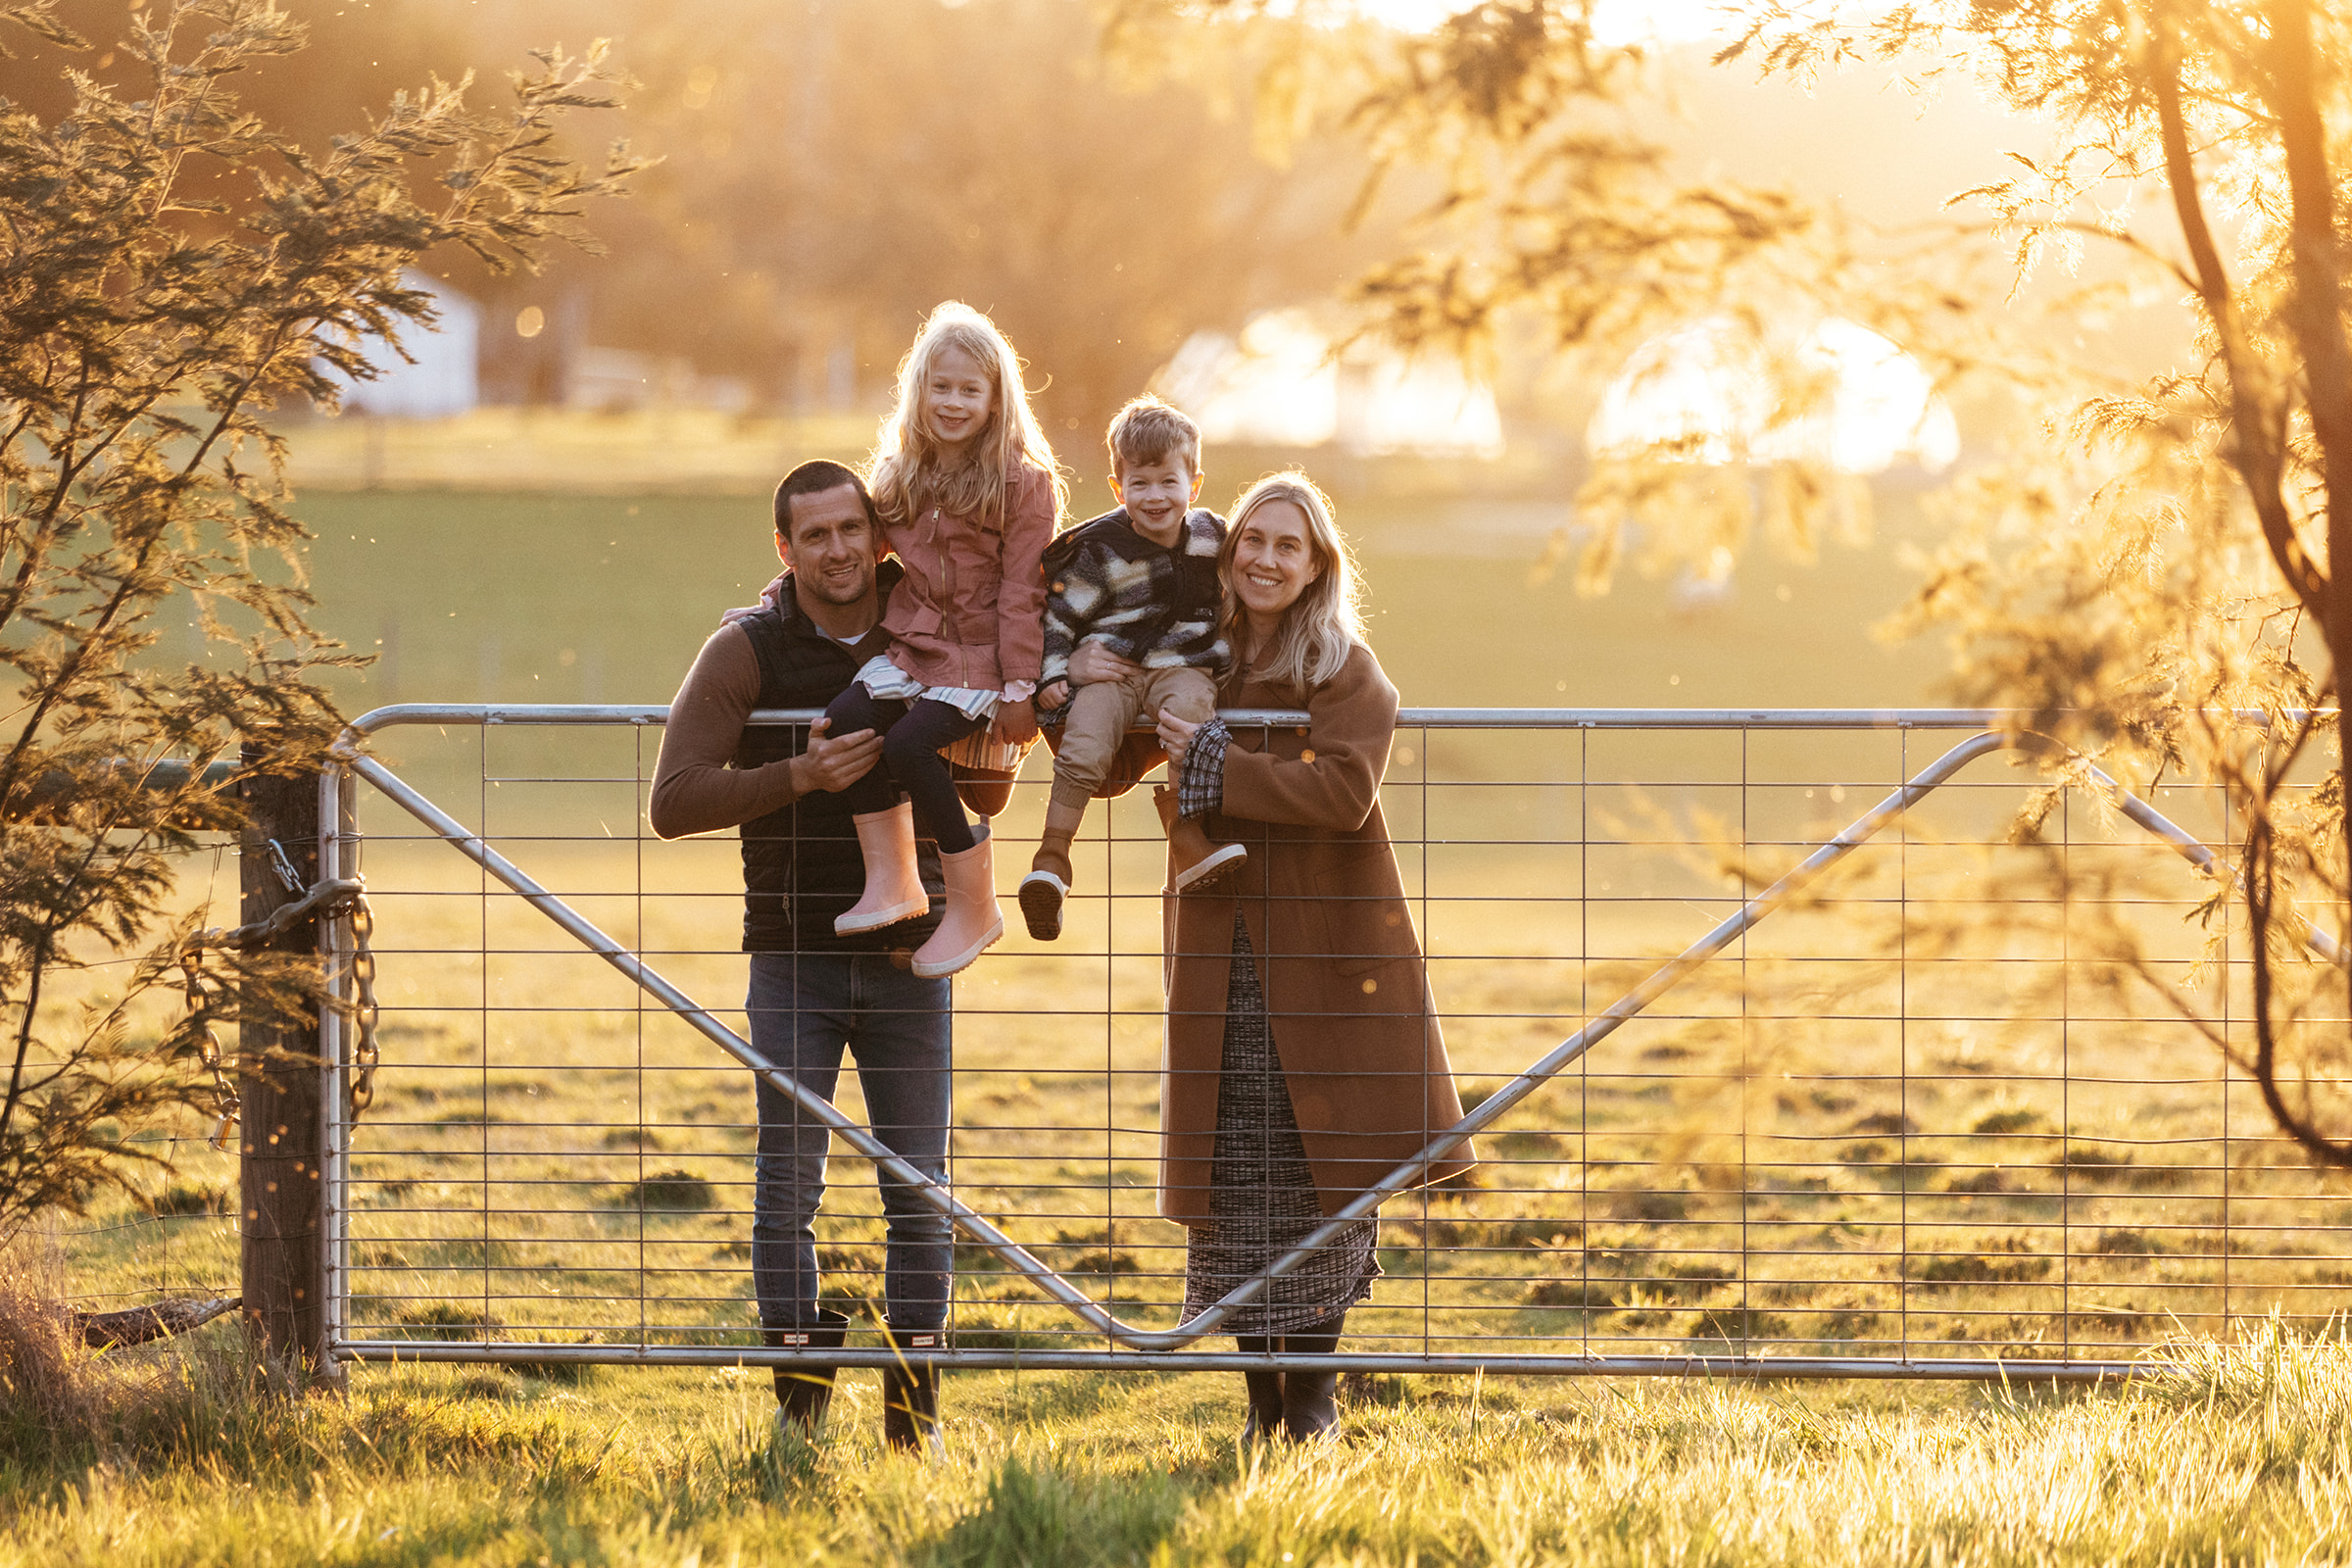 Capturing Precious Moments: Family Photography in the Macedon Ranges
Family in Kyneton on a Farm